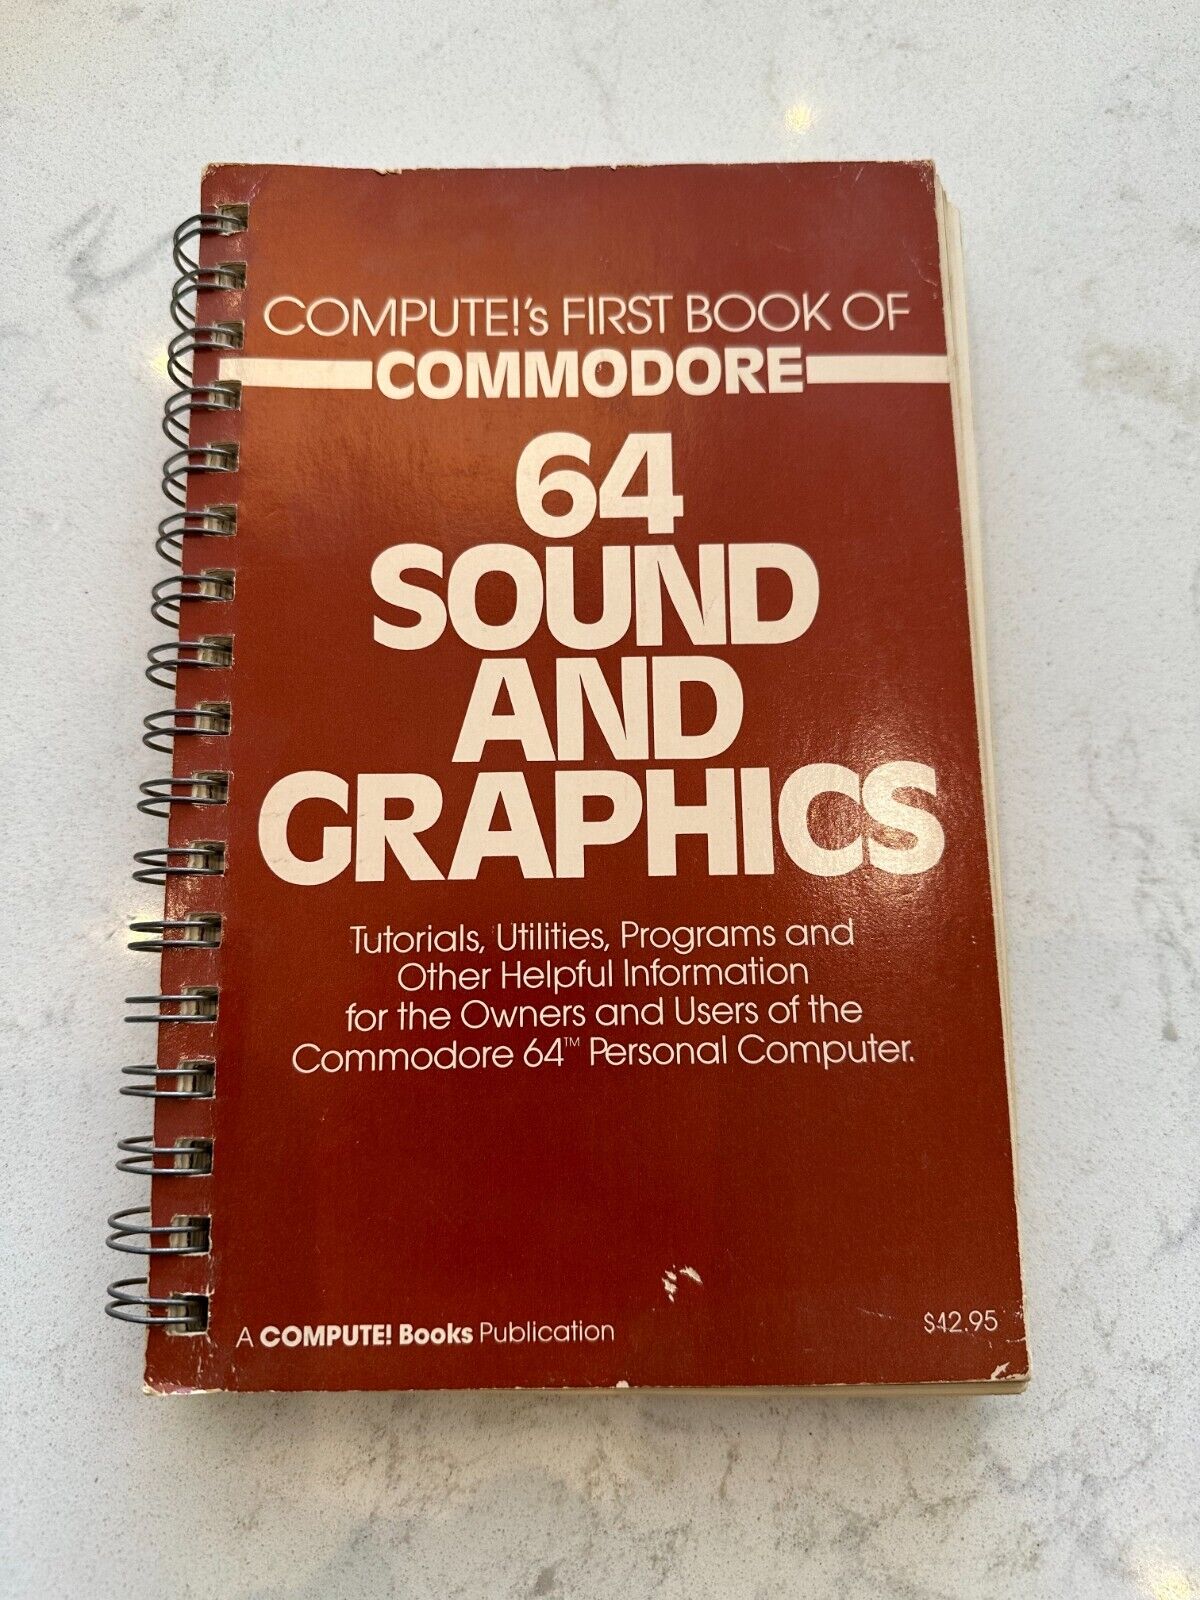 Compute's First Book of Commodore 64 Sound and Graphics Vintage Book